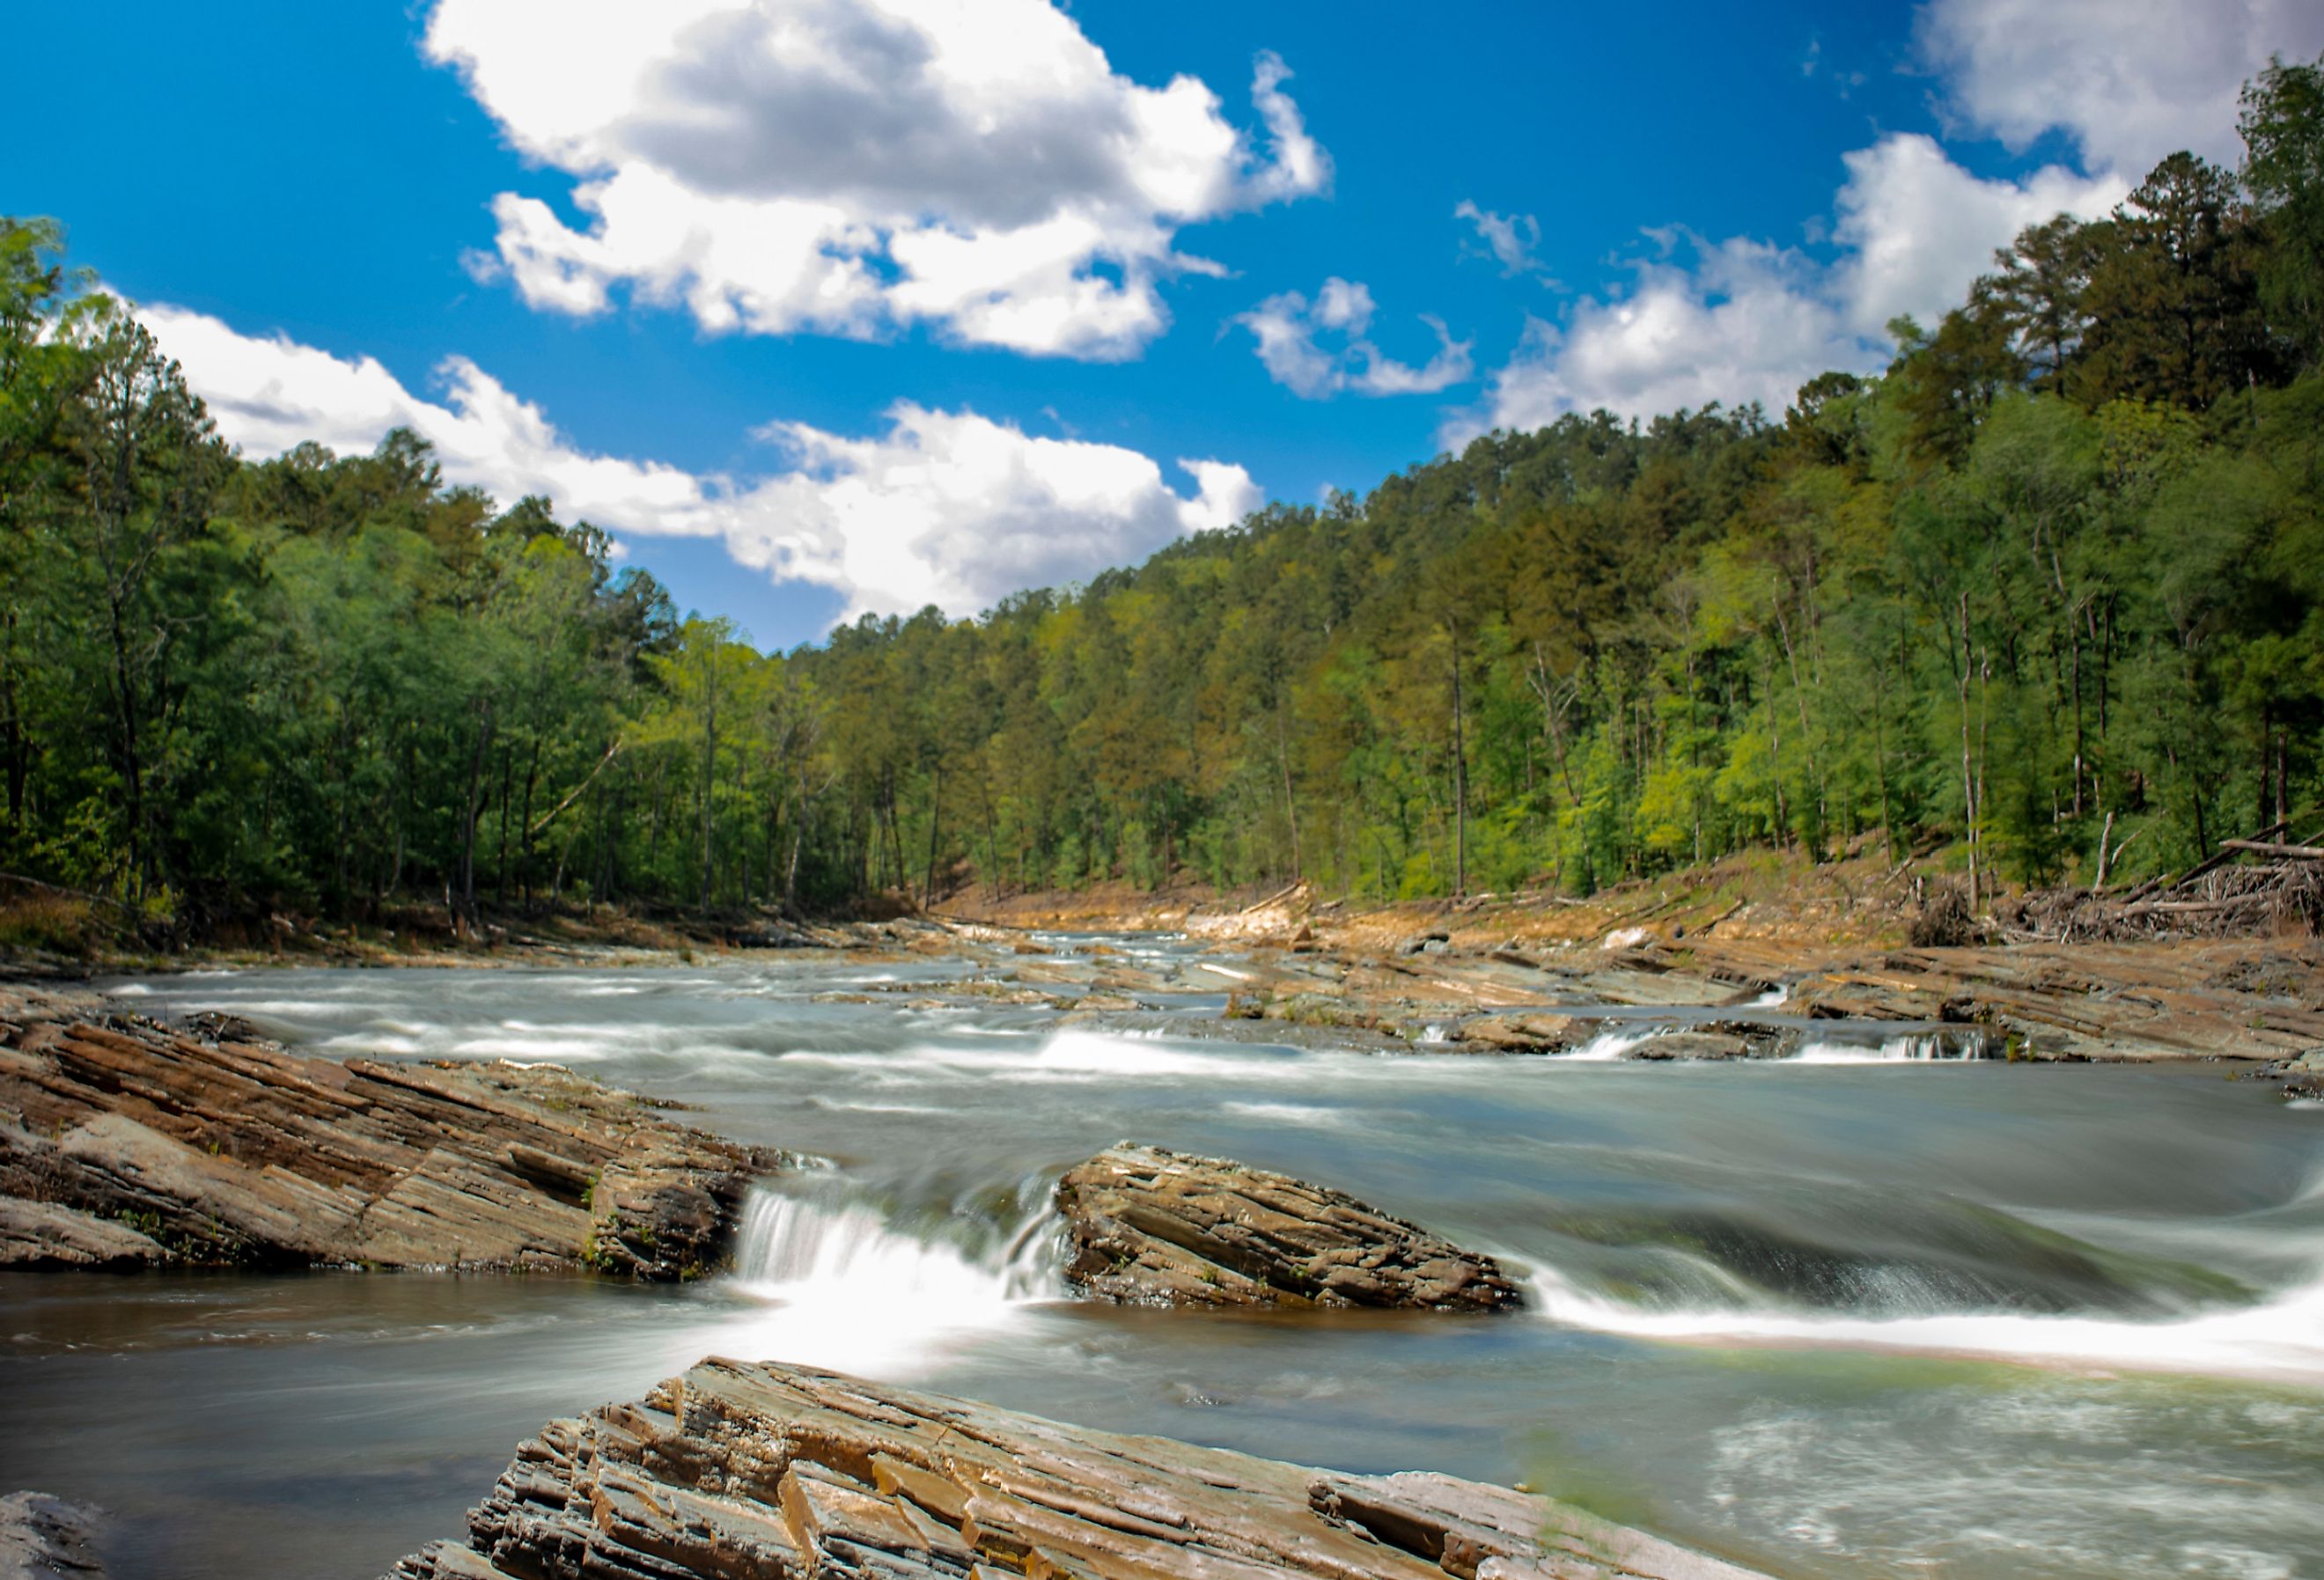 Beaver Bend State Park river view with lush forest in the background. Image credit Jordons Edits via Shutterstock.